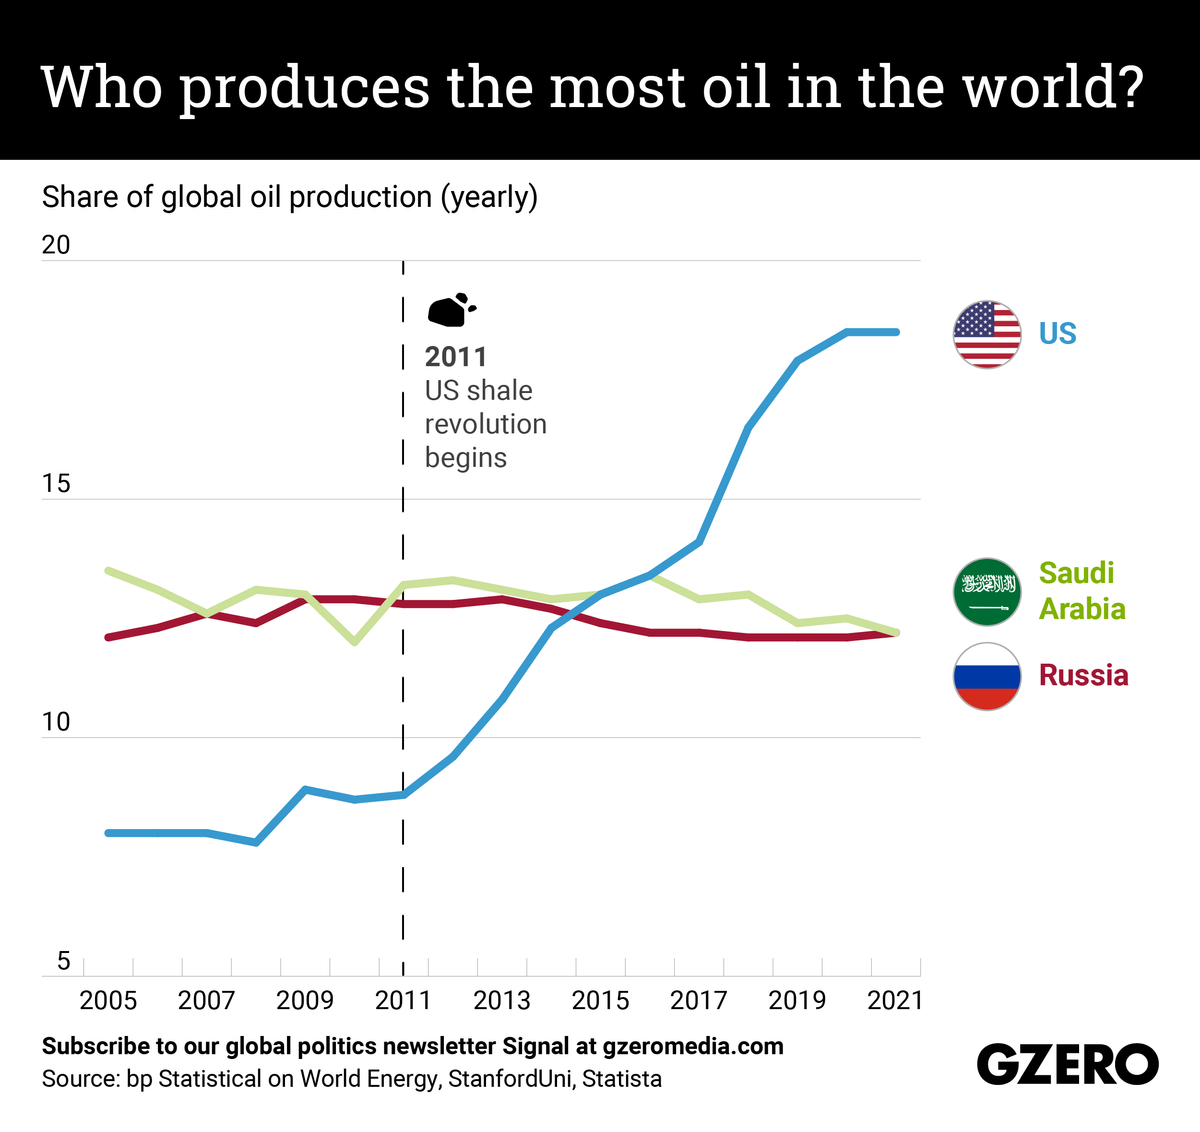 The Graphic Truth: Who produces the most oil in the world?